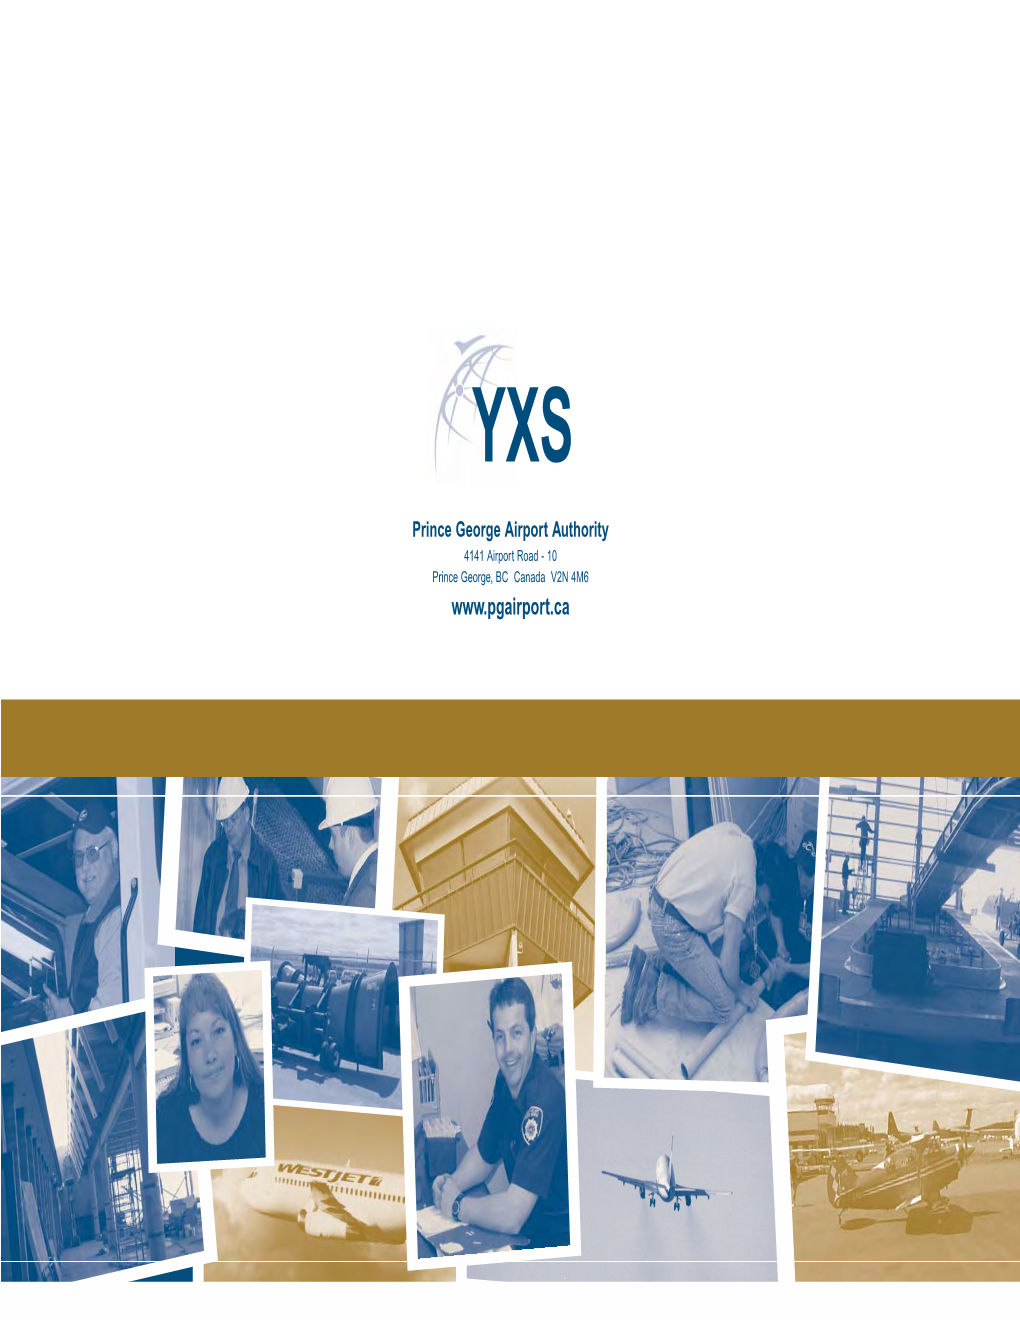 YXS Prince George Airport Authority 2003 Annual Report